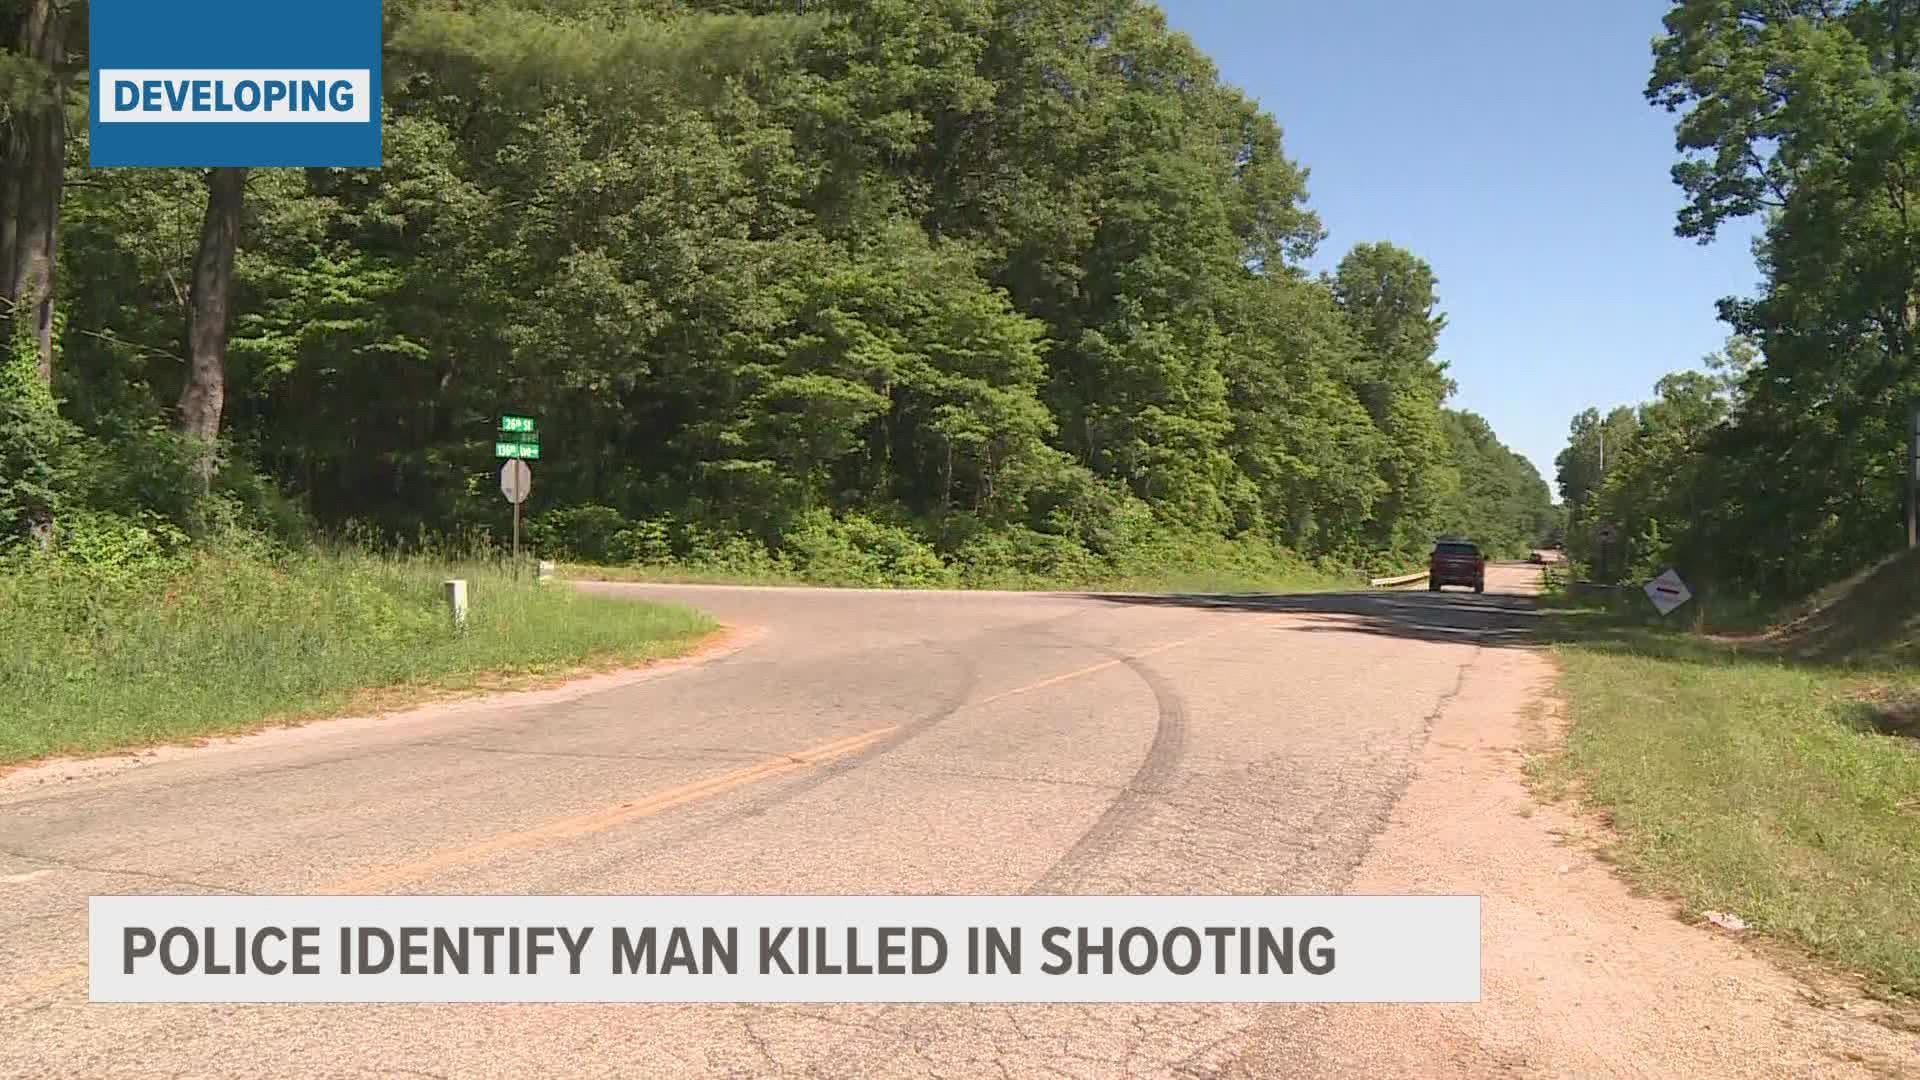 A 22-year-old Comstock Park man was fatally shot by a Deputy during a traffic stop Thursday in Allegan County.